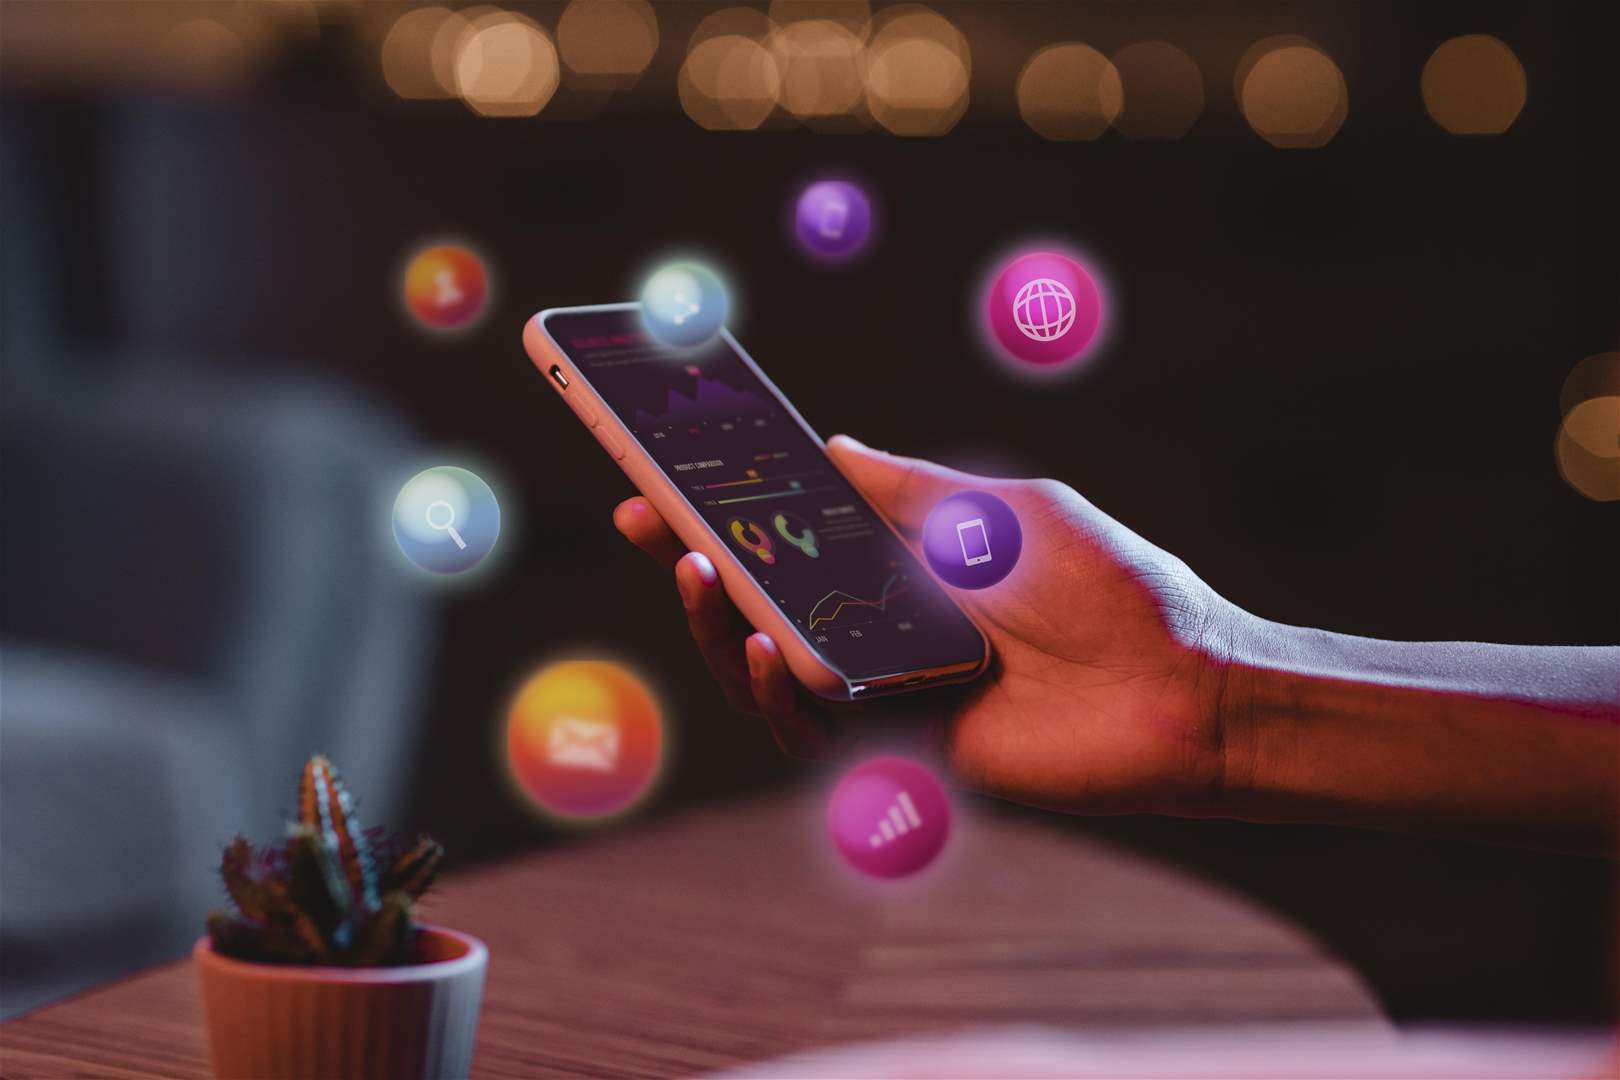 The Mobile Marketing is Your Ticket to Reach, Connect, and Win!